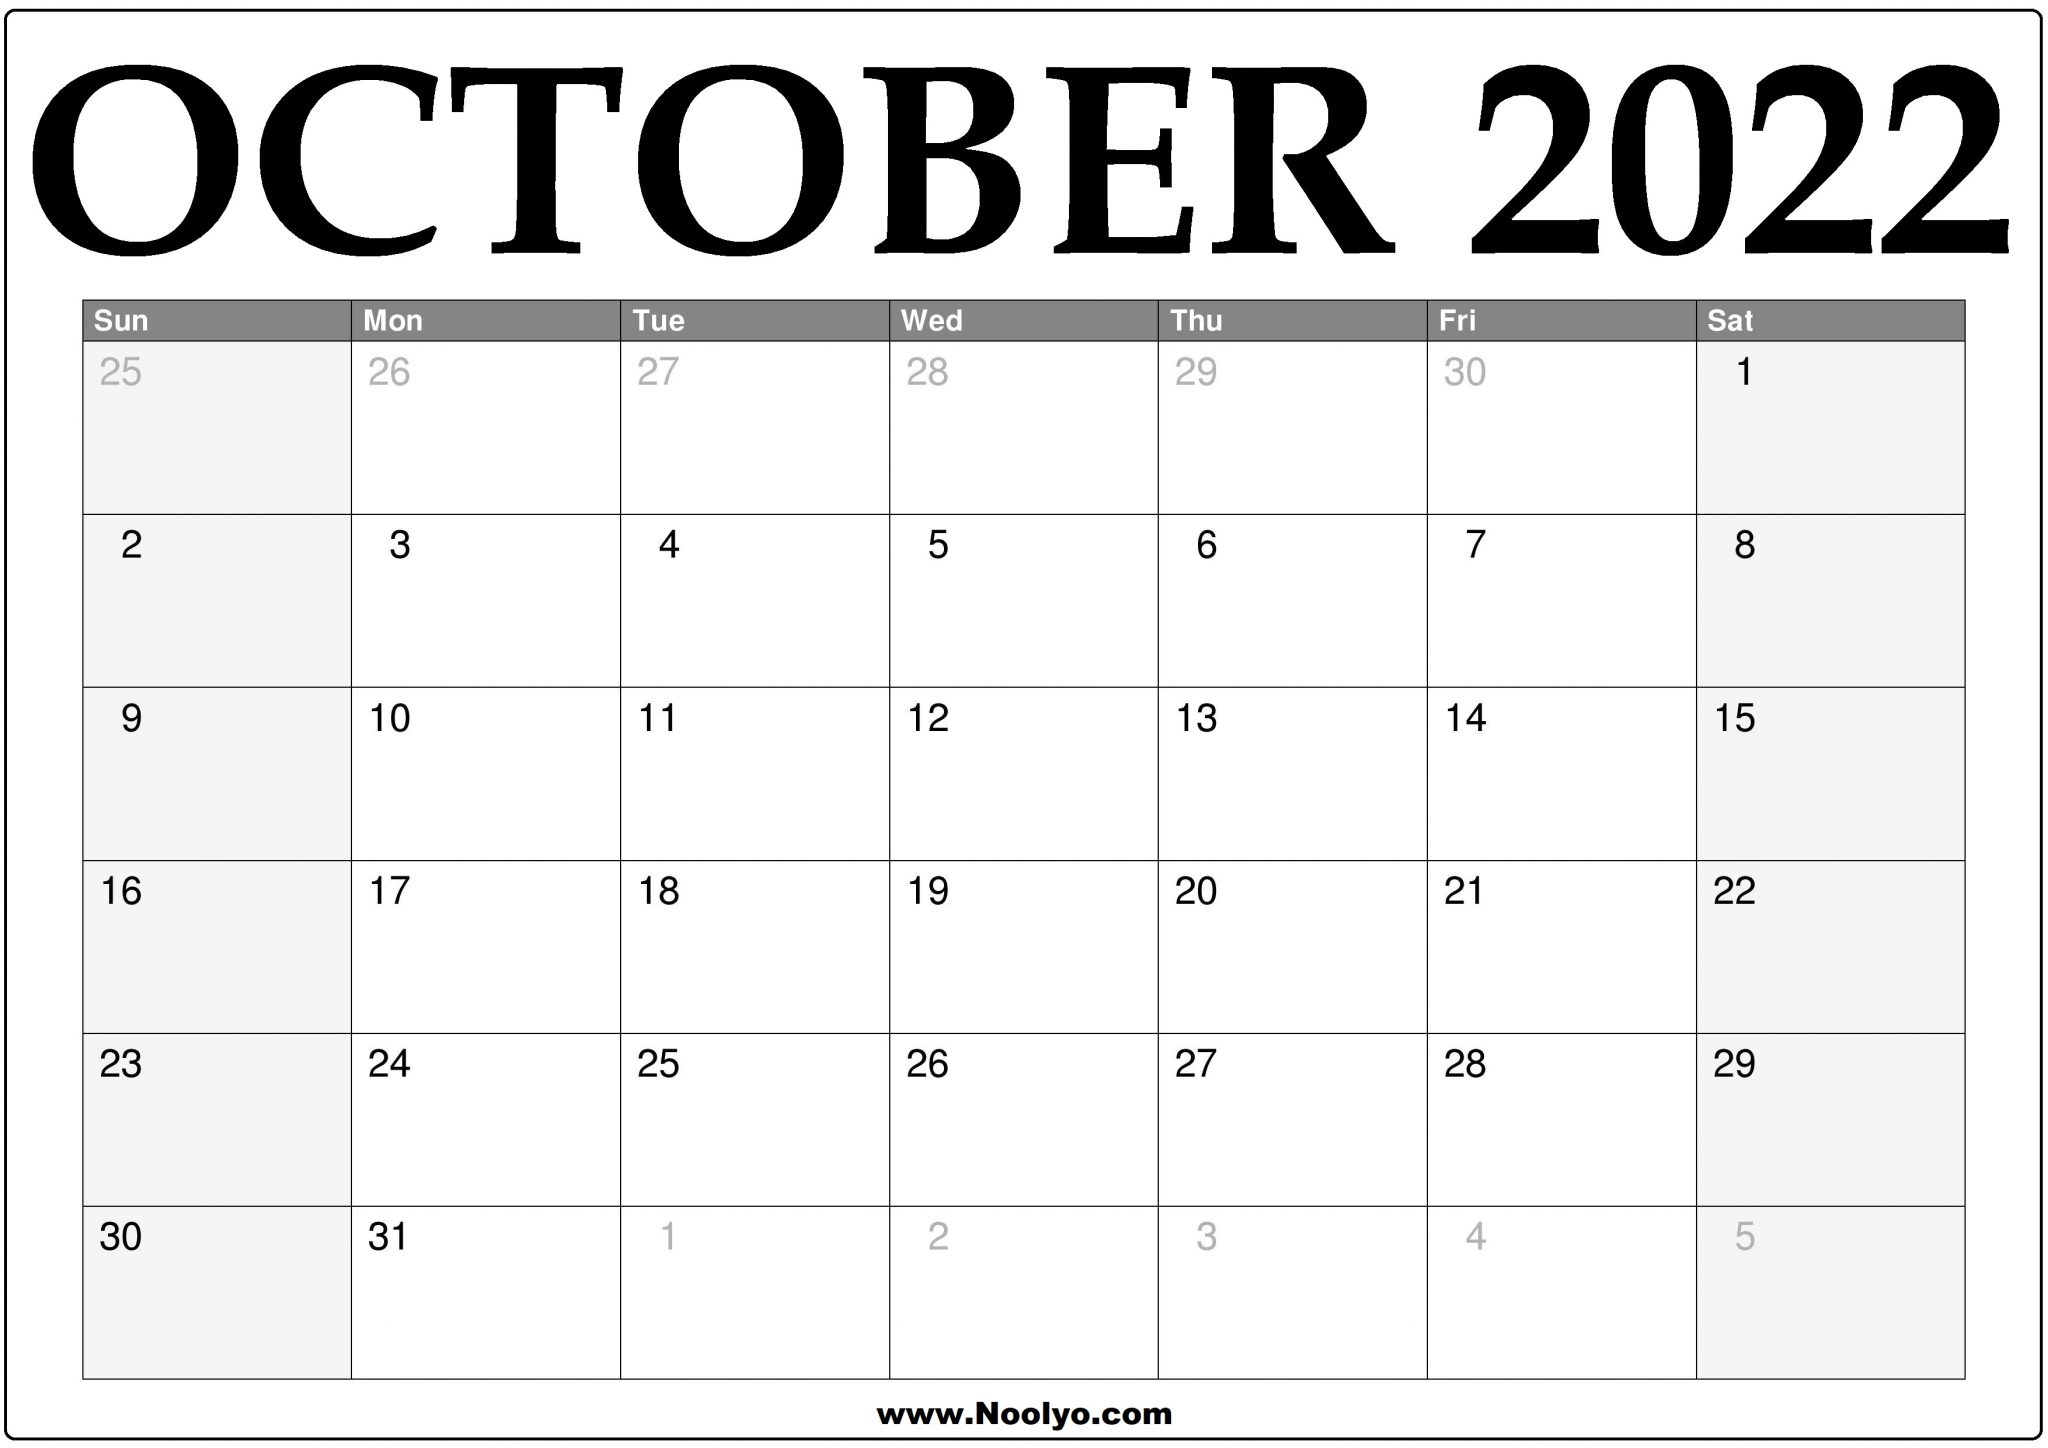 2022-october-calendar-printable-download-free-calendars-images-and